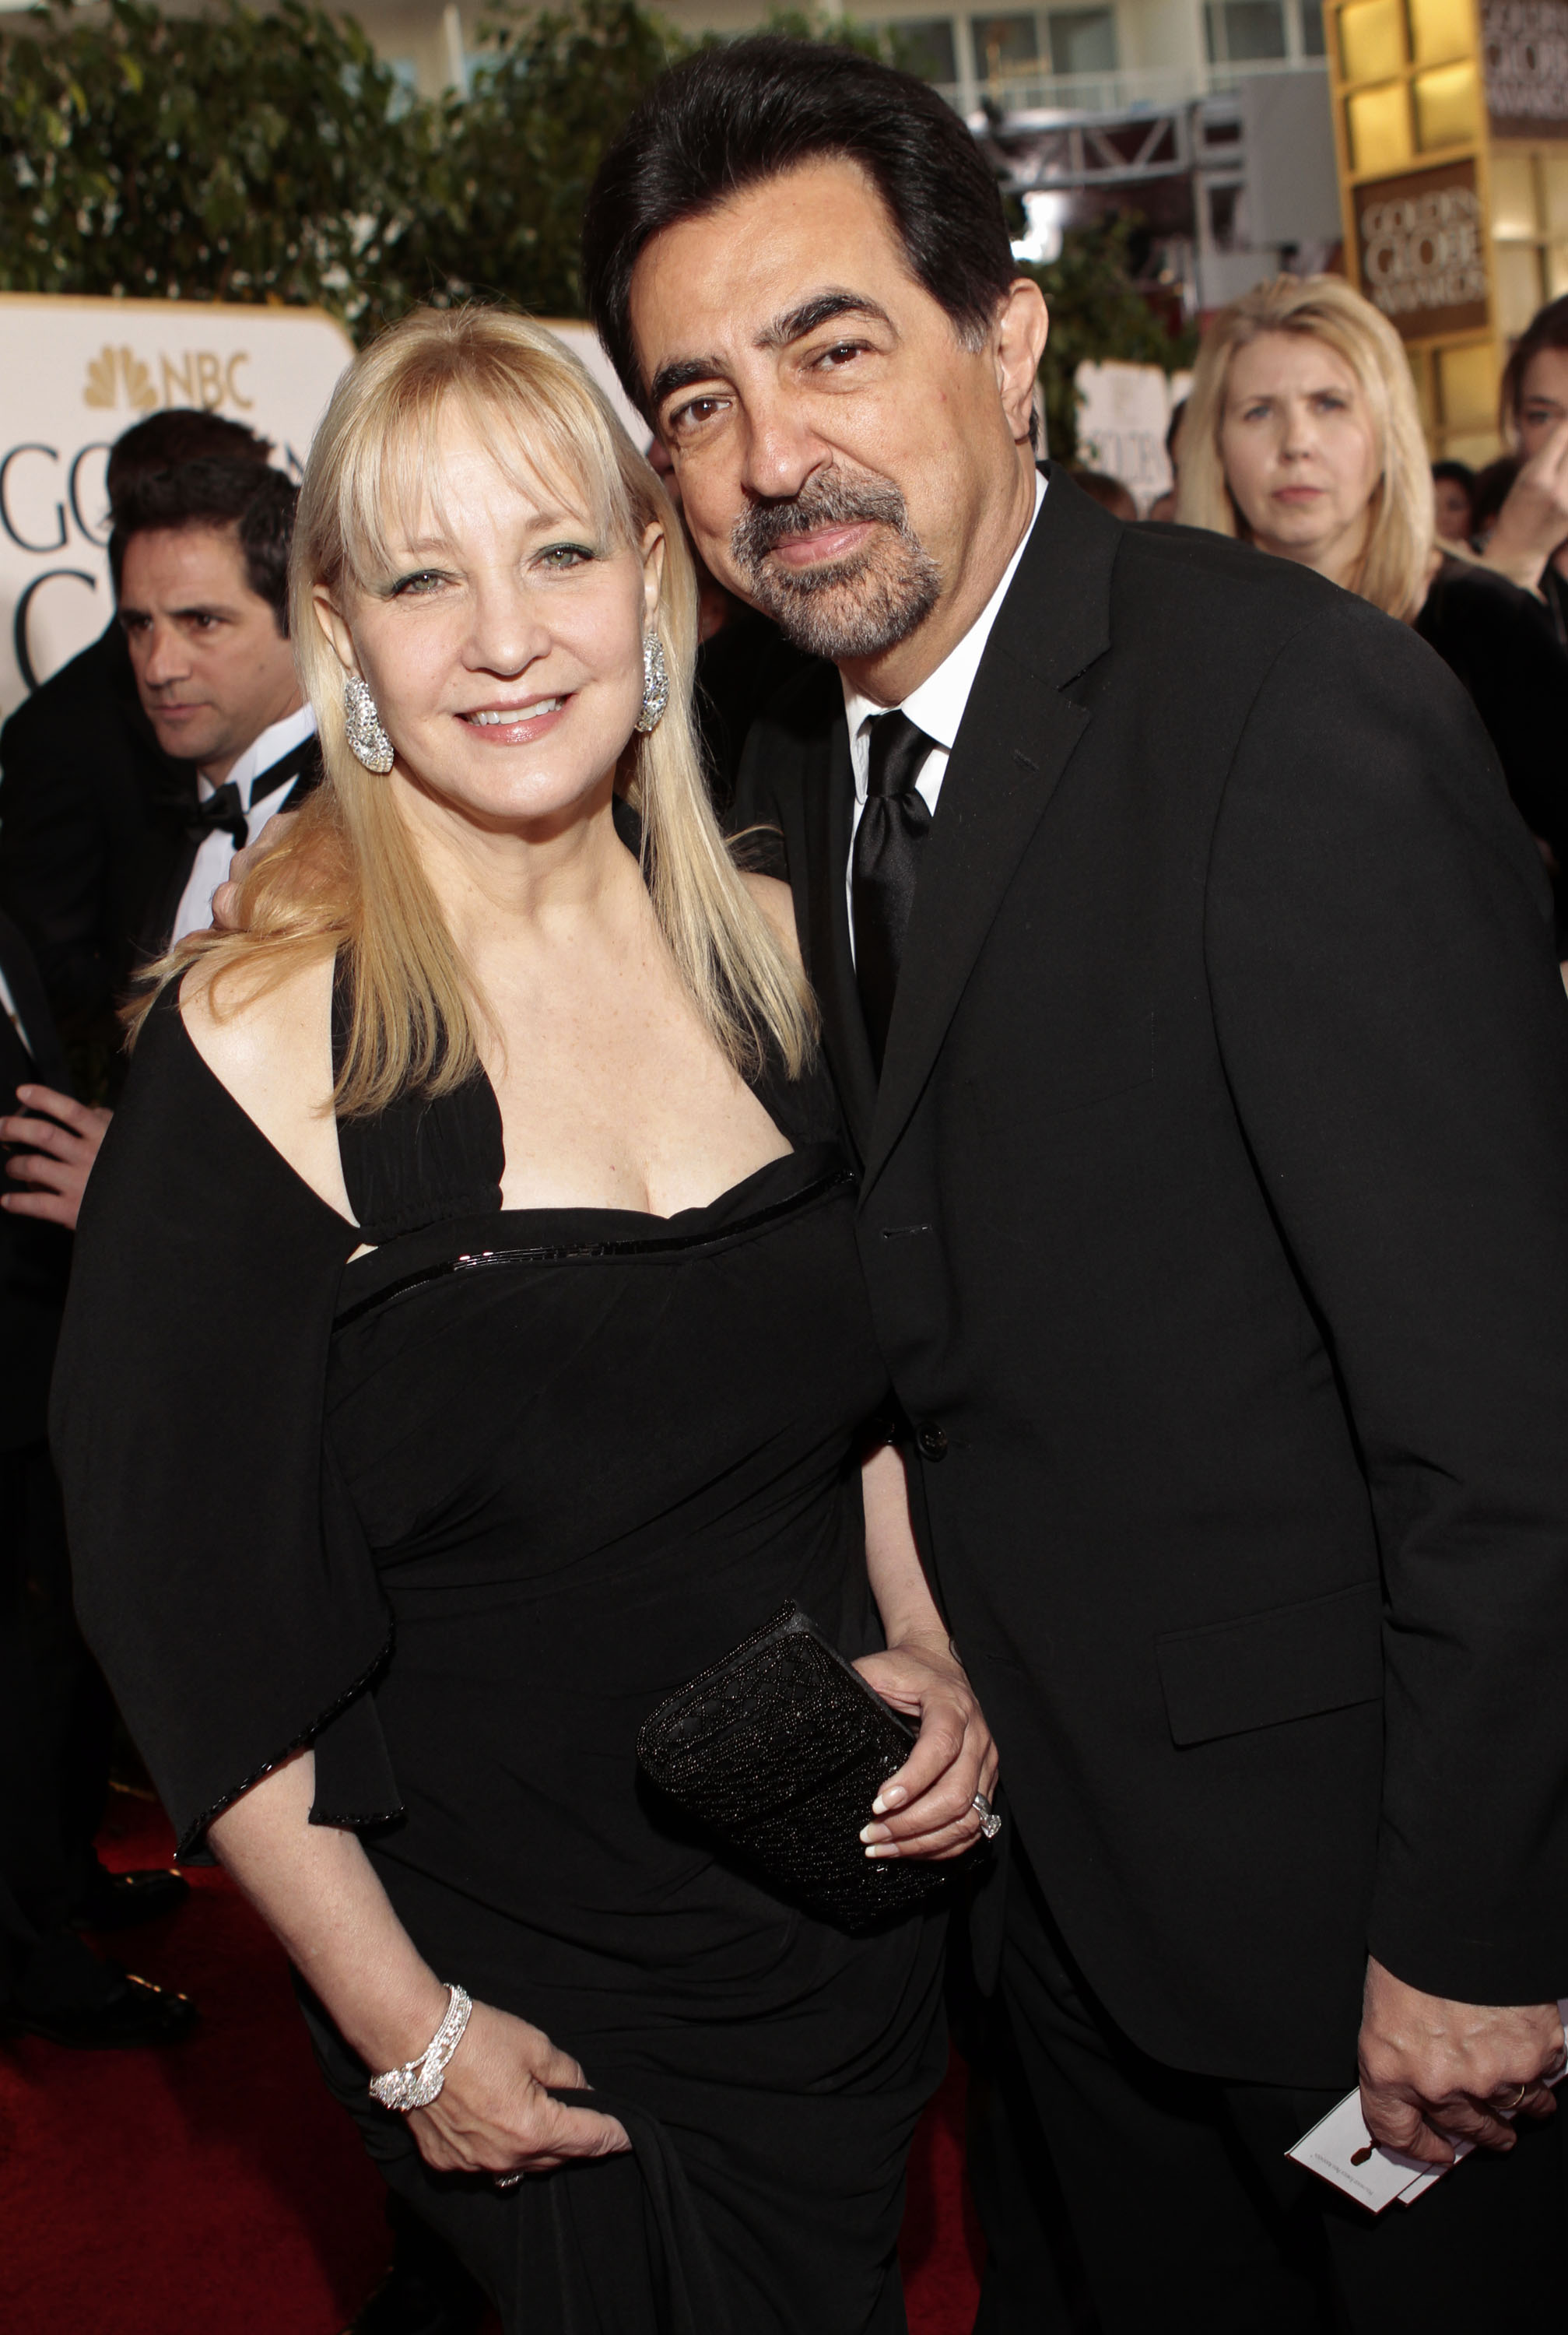 Arlene Vhrel and Joe Mantegna at the 68th Annual Golden Globe Awards in Beverly Hills, California on January 16, 2011 | Source: Getty Images